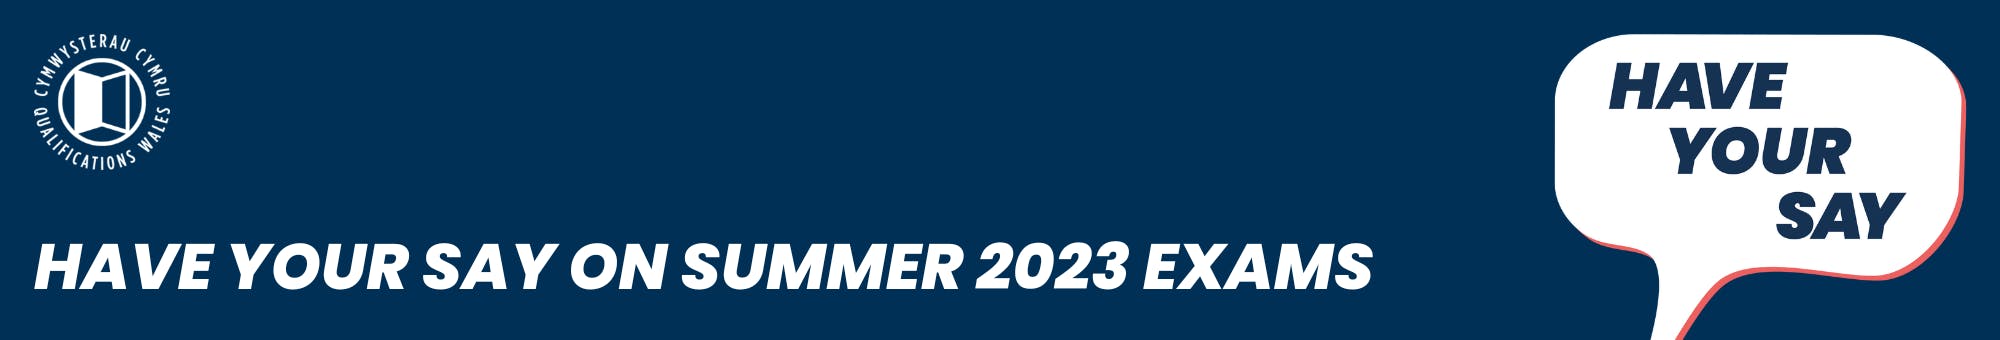 Have Your Say on Summer 2023 Exams